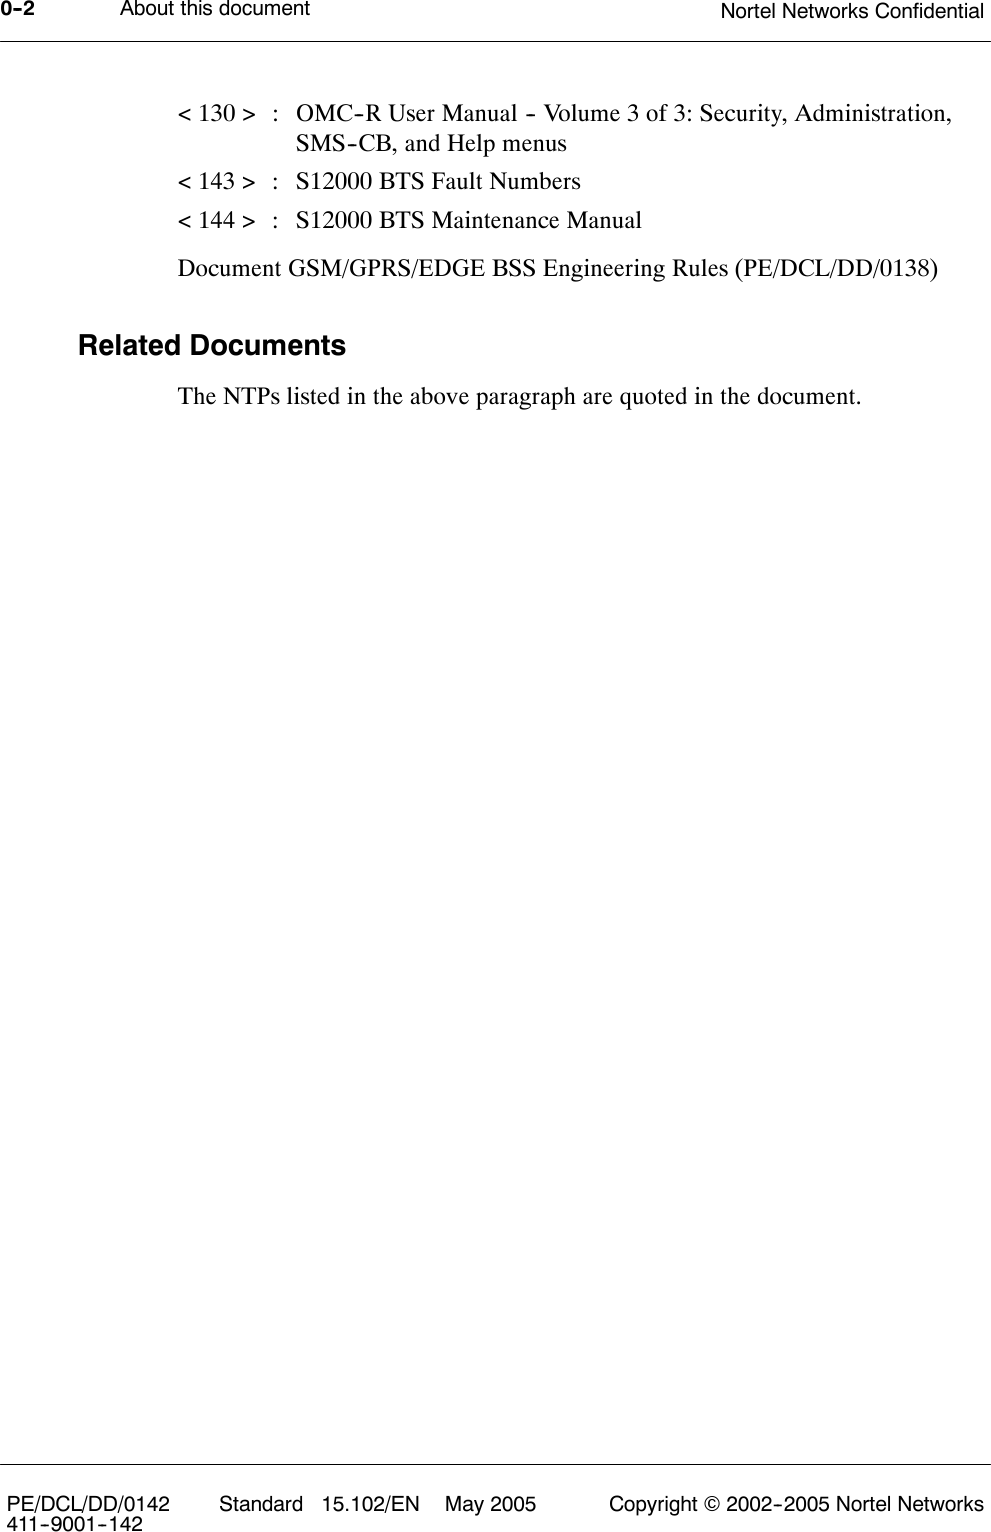 About this document Nortel Networks Confidential0--2PE/DCL/DD/0142411--9001--142 Standard 15.102/EN May 2005 Copyright ©2002--2005 Nortel Networks&lt; 130 &gt; : OMC--R User Manual -- Volume 3 of 3: Security, Administration,SMS--CB, and Help menus&lt; 143 &gt; : S12000 BTS Fault Numbers&lt; 144 &gt; : S12000 BTS Maintenance ManualDocument GSM/GPRS/EDGE BSS Engineering Rules (PE/DCL/DD/0138)Related DocumentsThe NTPs listed in the above paragraph are quoted in the document.